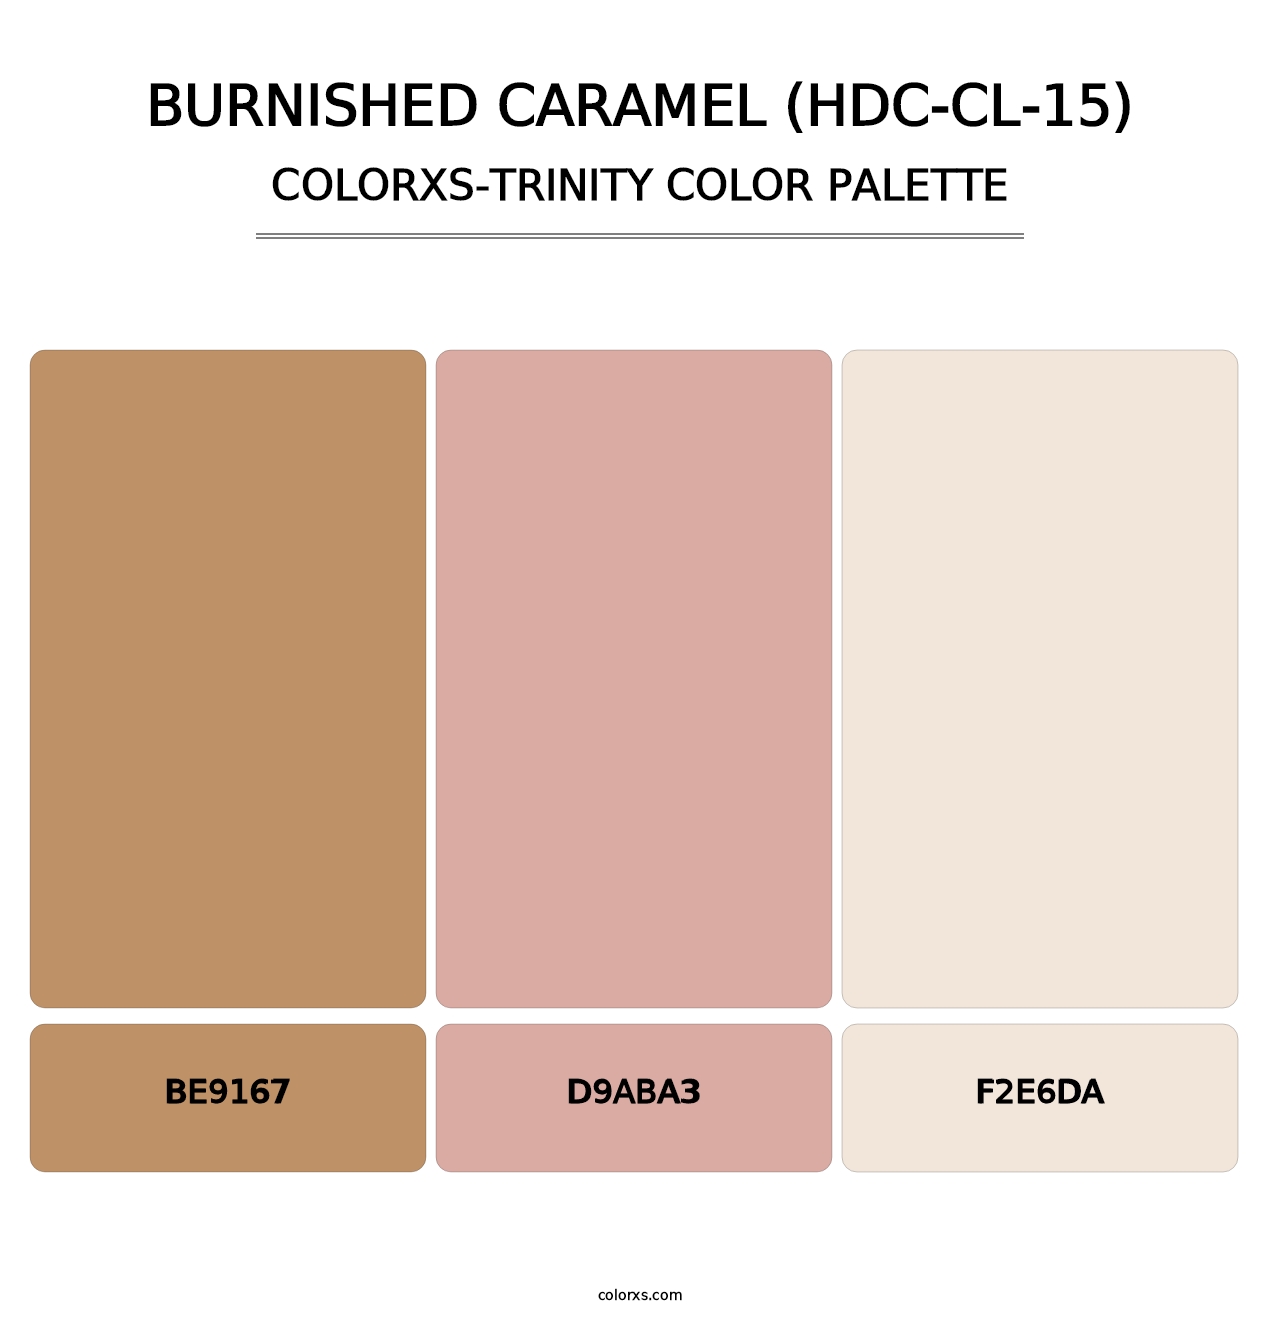 Burnished Caramel (HDC-CL-15) - Colorxs Trinity Palette